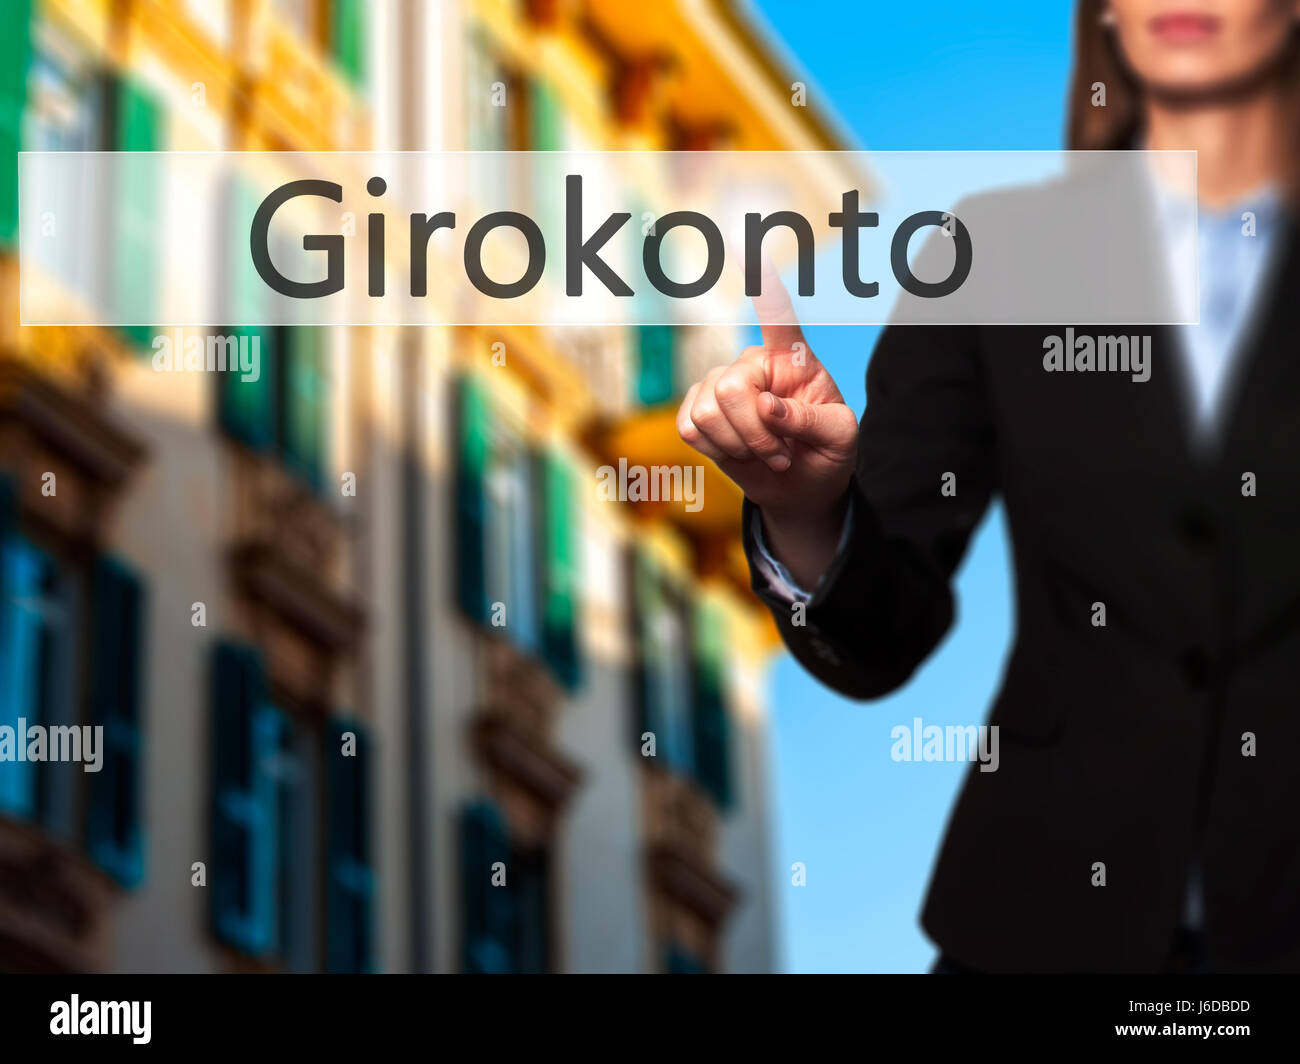 Girokonto (Checking Account) - Businesswoman hand pressing button on touch screen interface. Business, technology, internet concept. Stock Photo Stock Photo